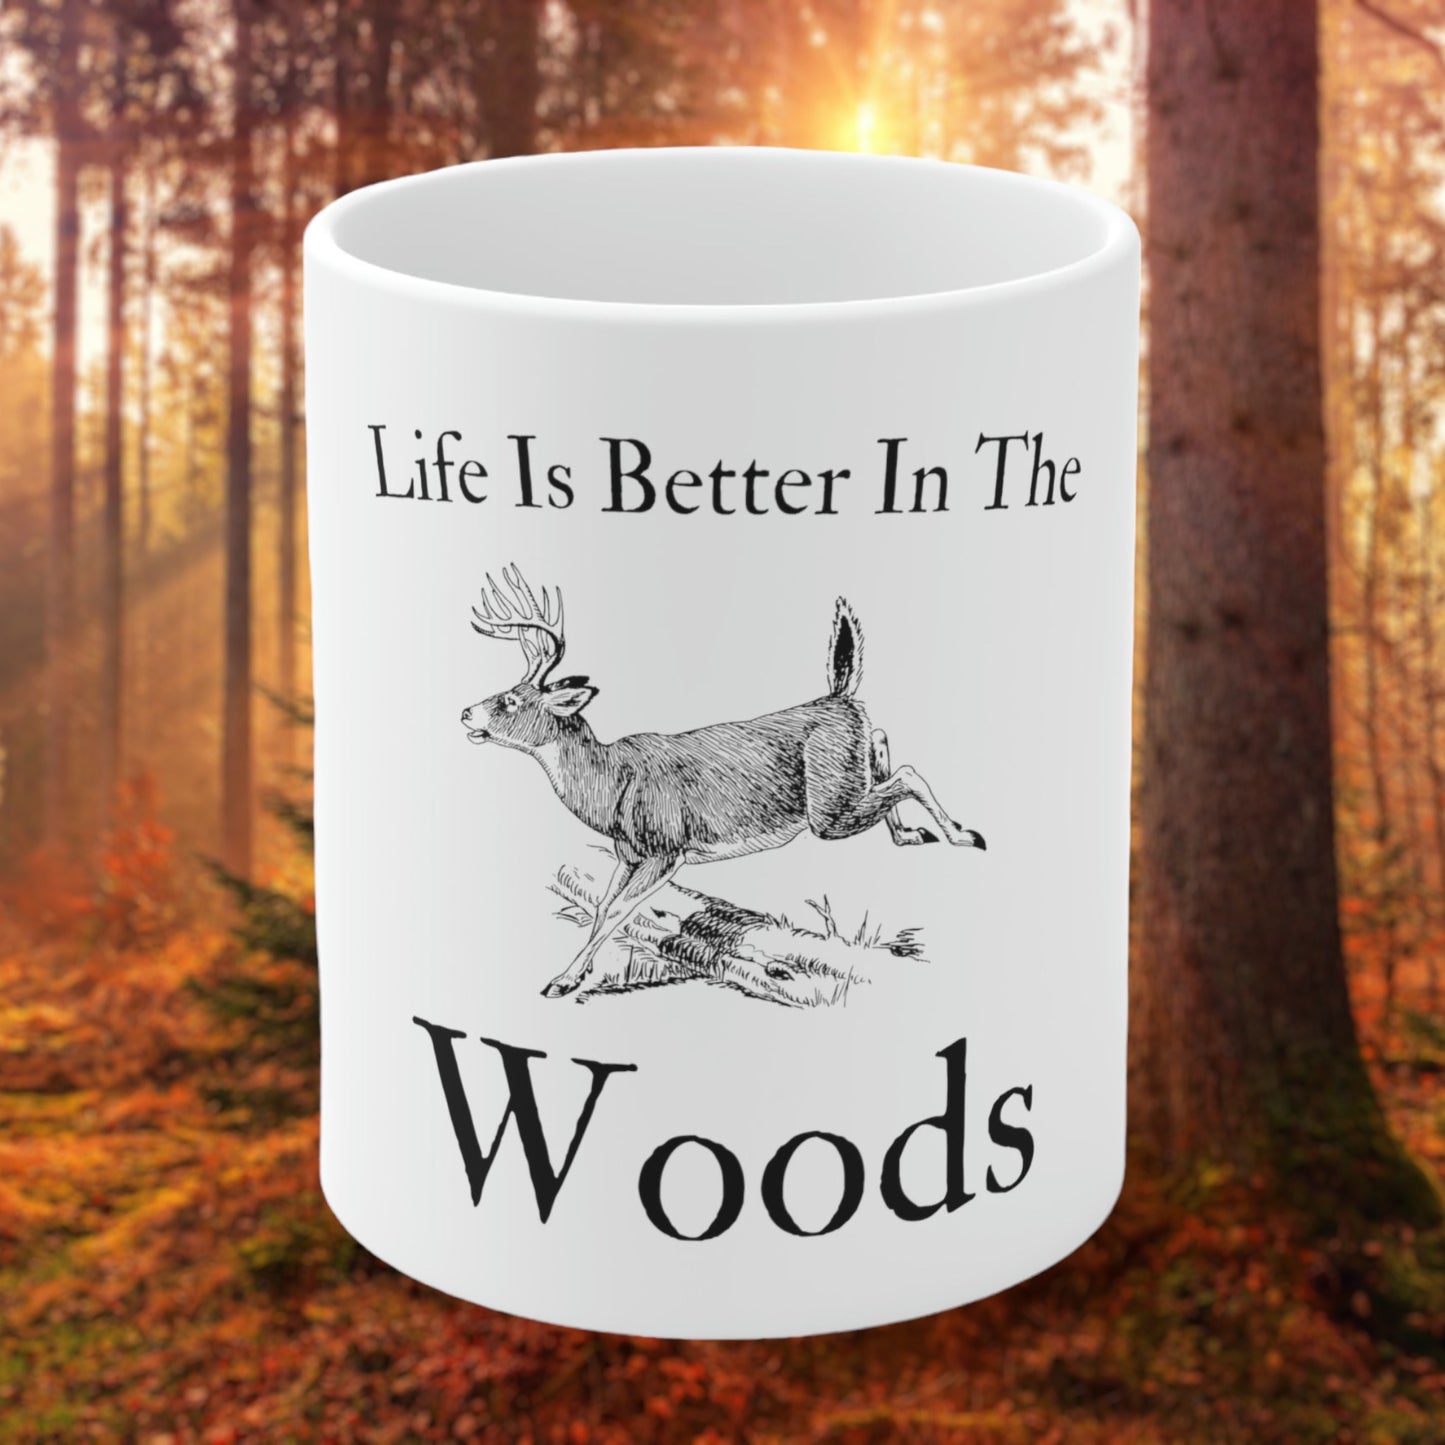 "Life Is Better In The Woods" Coffee Cup - Weave Got Gifts - Unique Gifts You Won’t Find Anywhere Else!